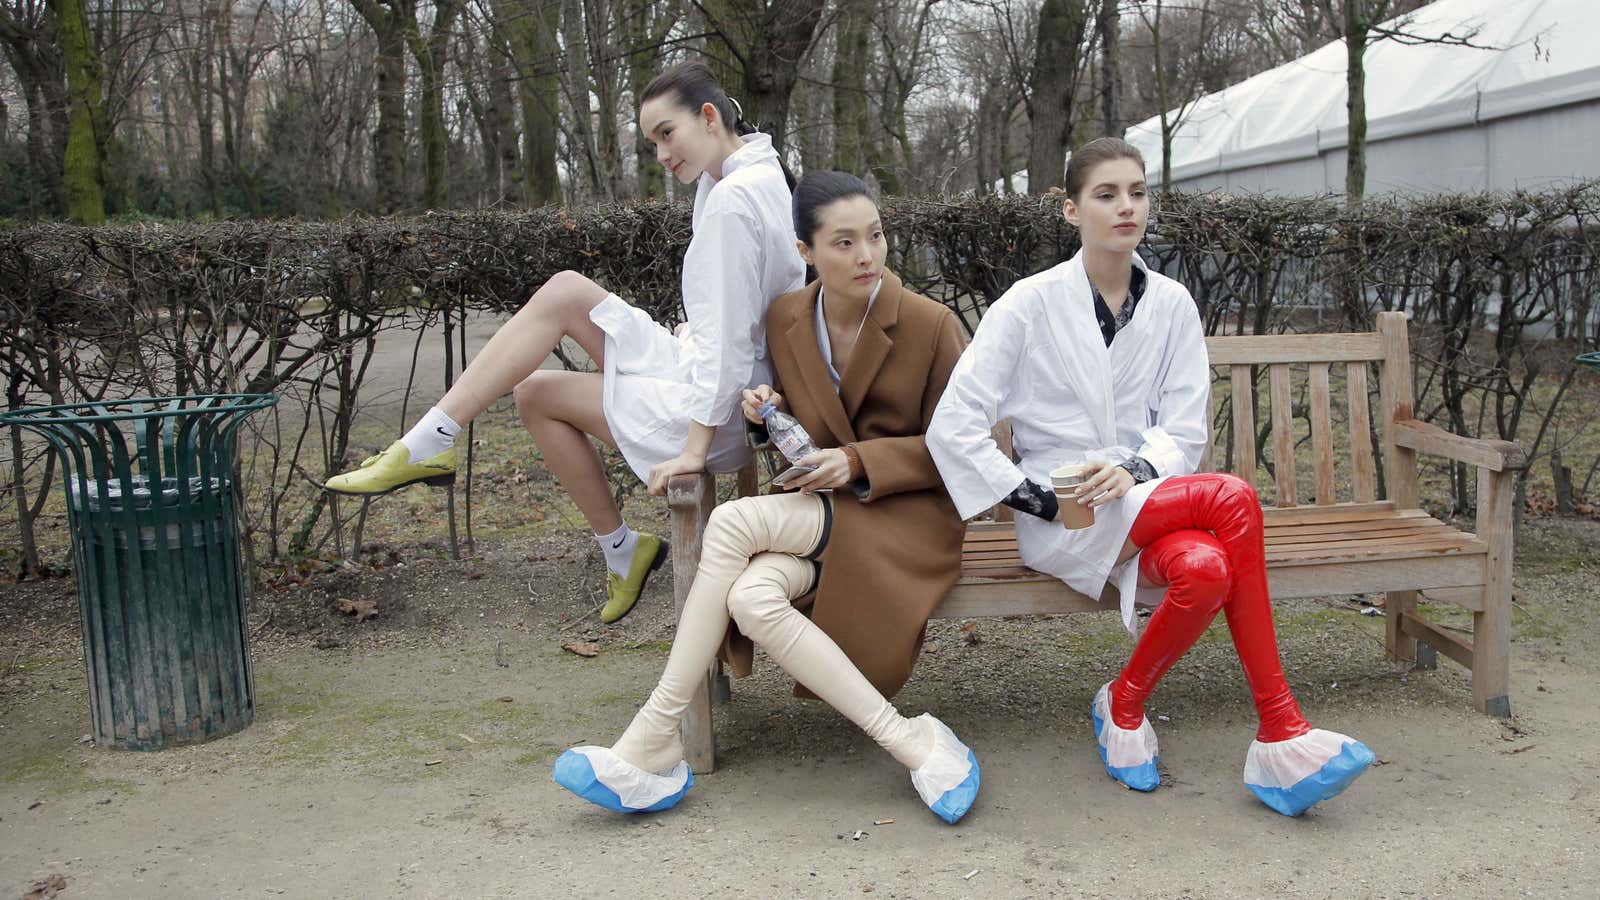 Just another Monday for models on break outside Dior’s couture show in Paris.